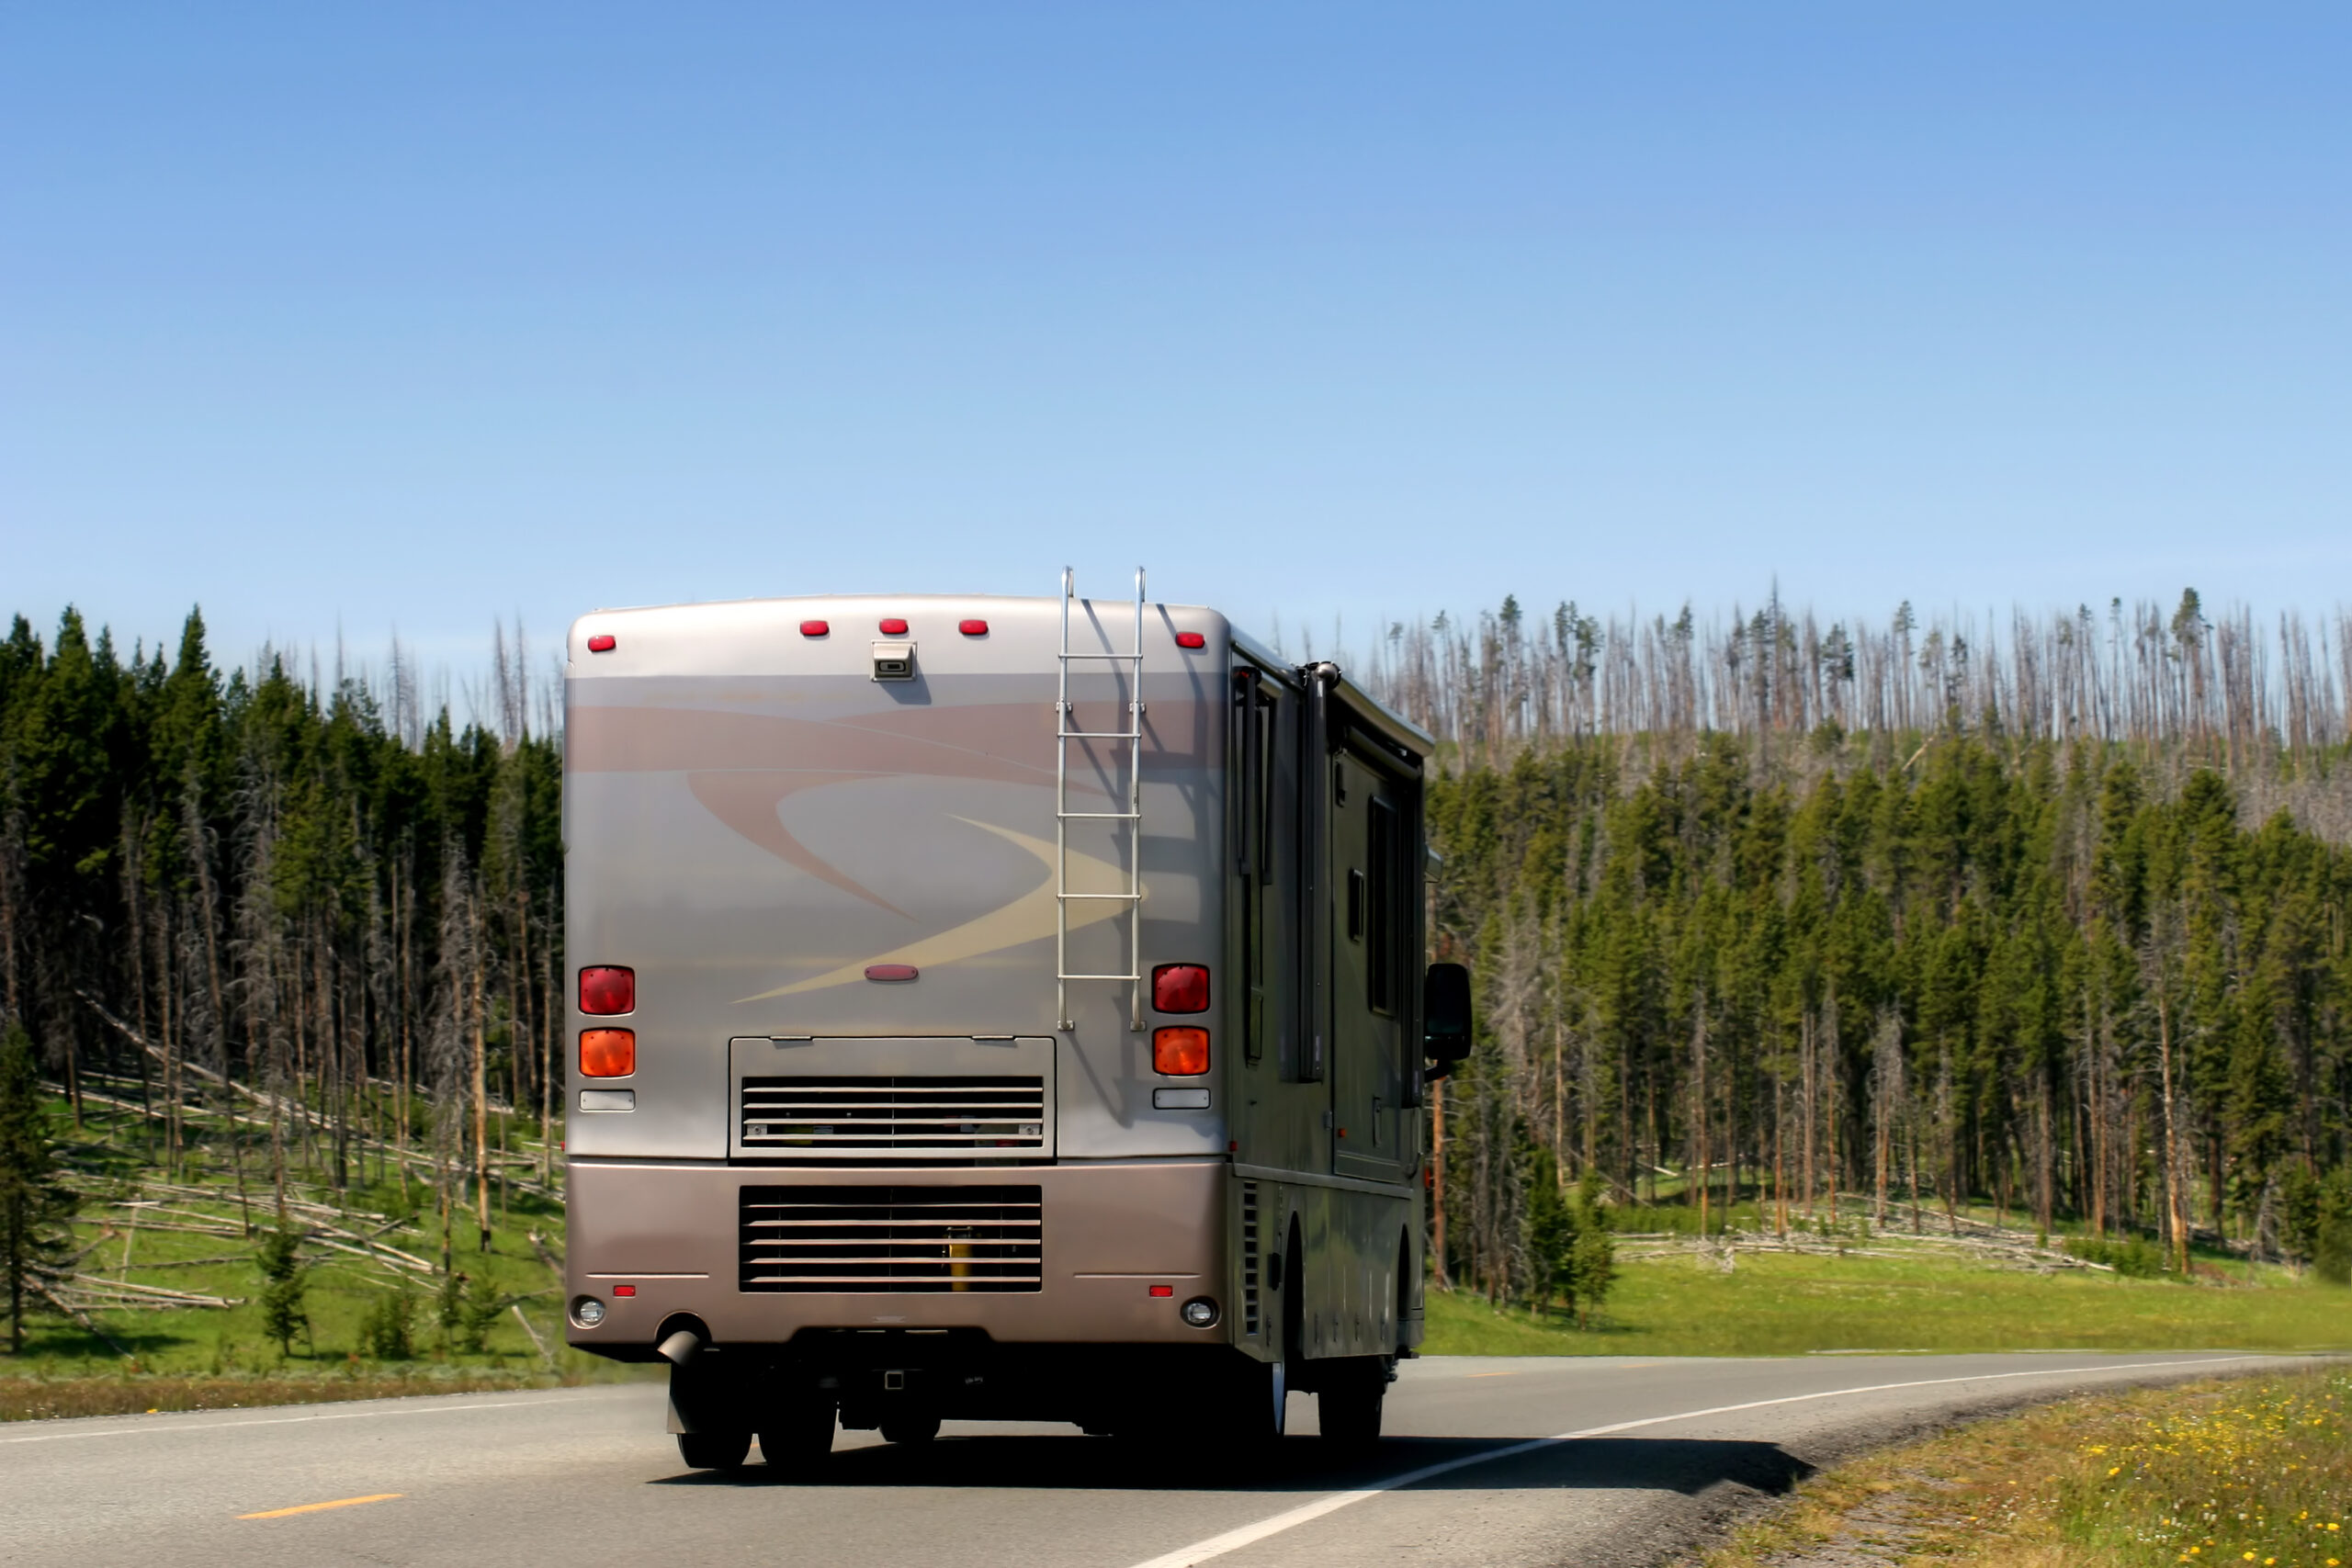 RV in Yellowstone National Park